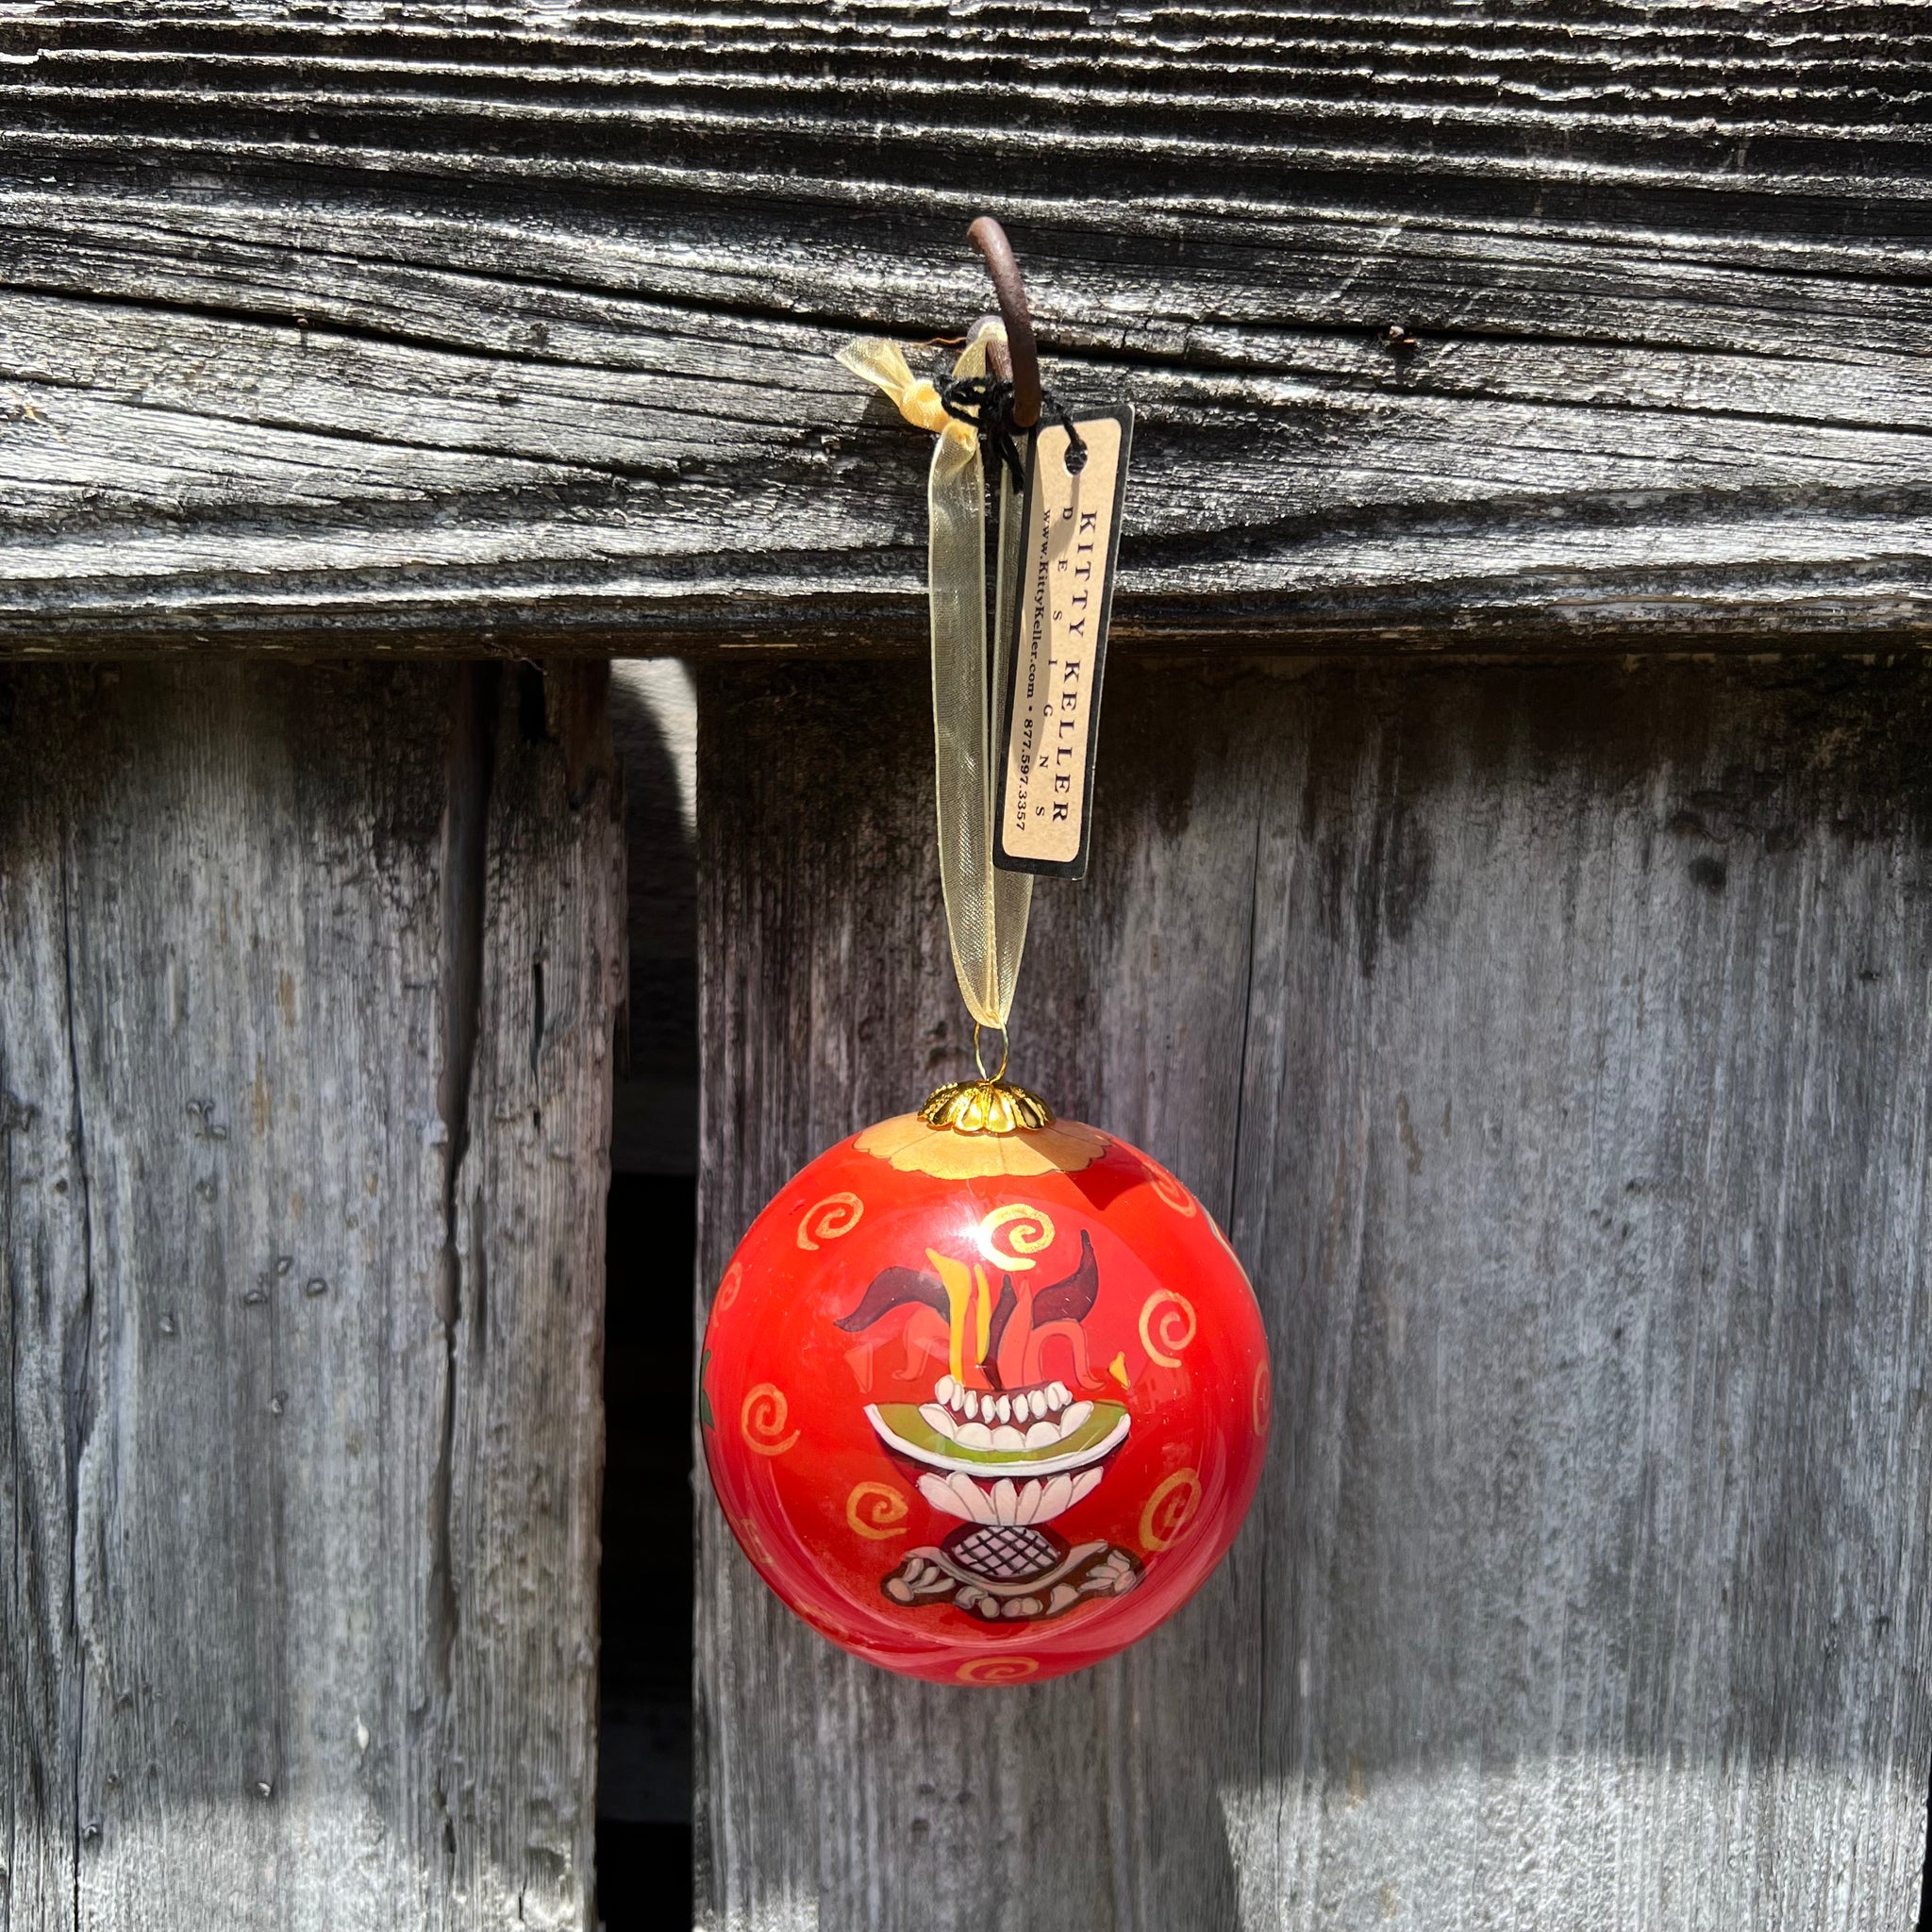 Flagler College Hand Paint Ornament